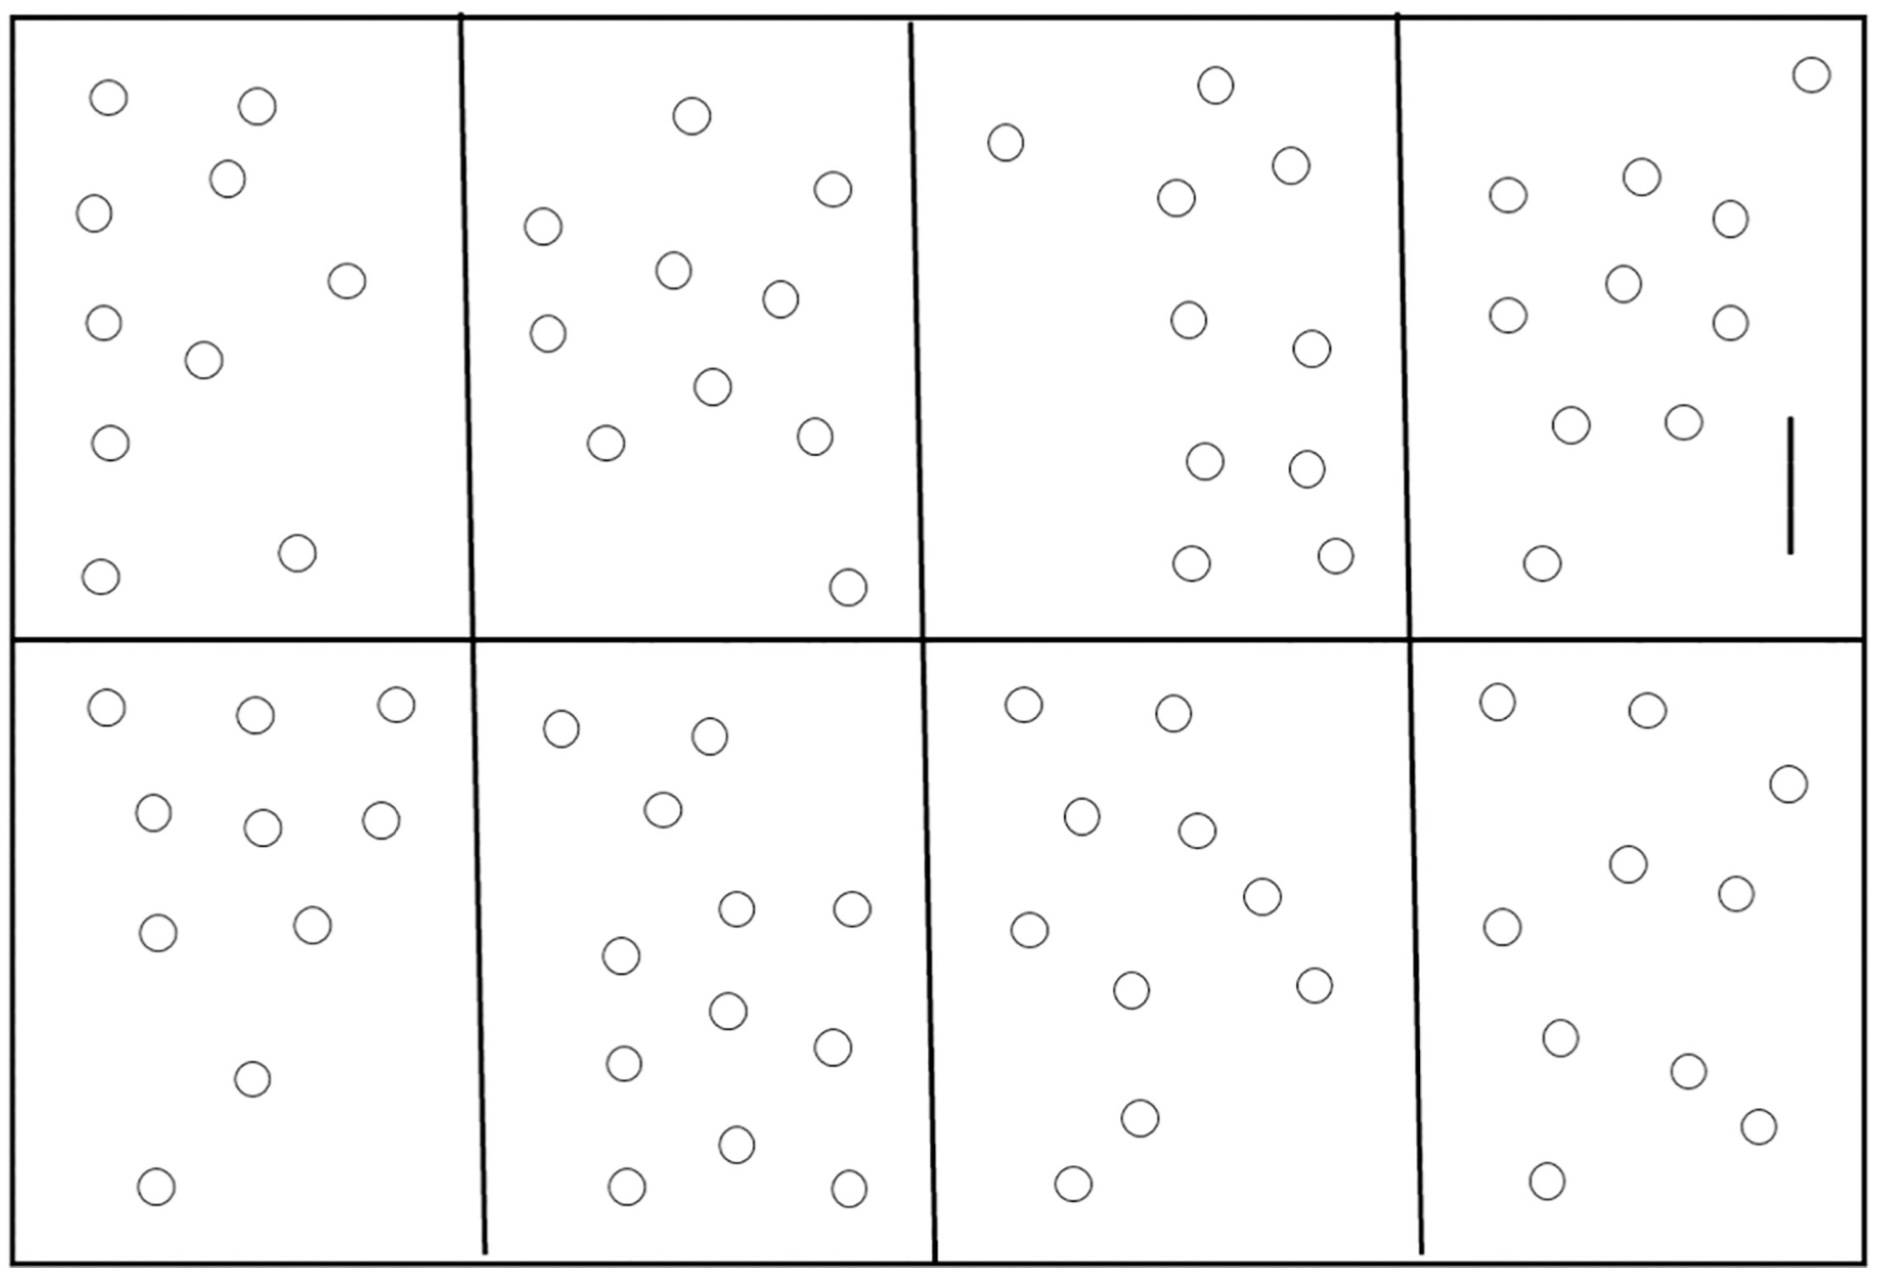 Fig. 3: Sheet chart used during the fine motor skills tests.